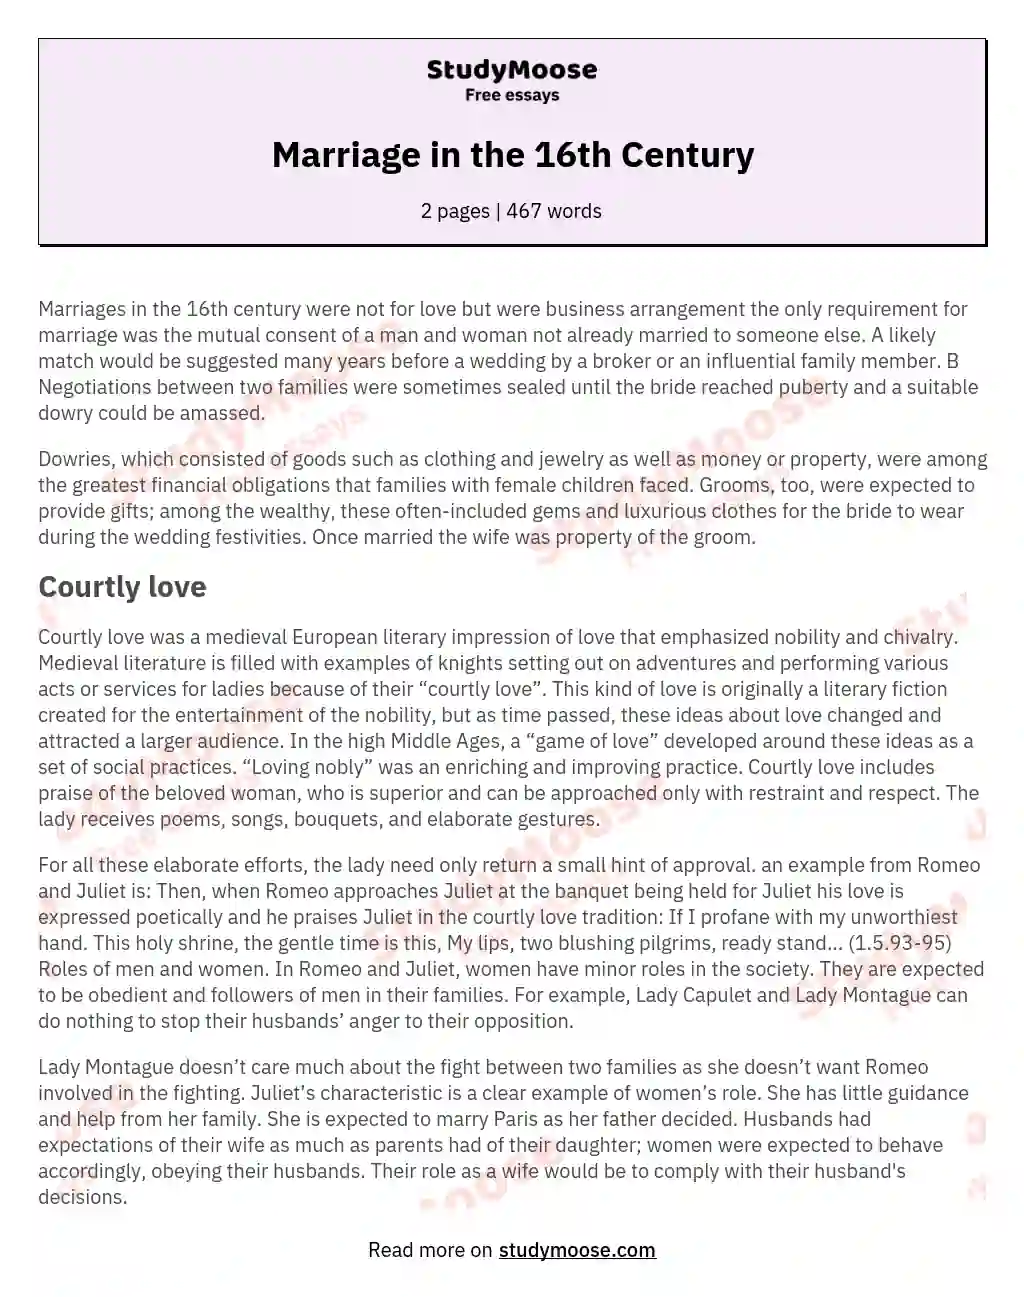 Marriage in the 16th Century